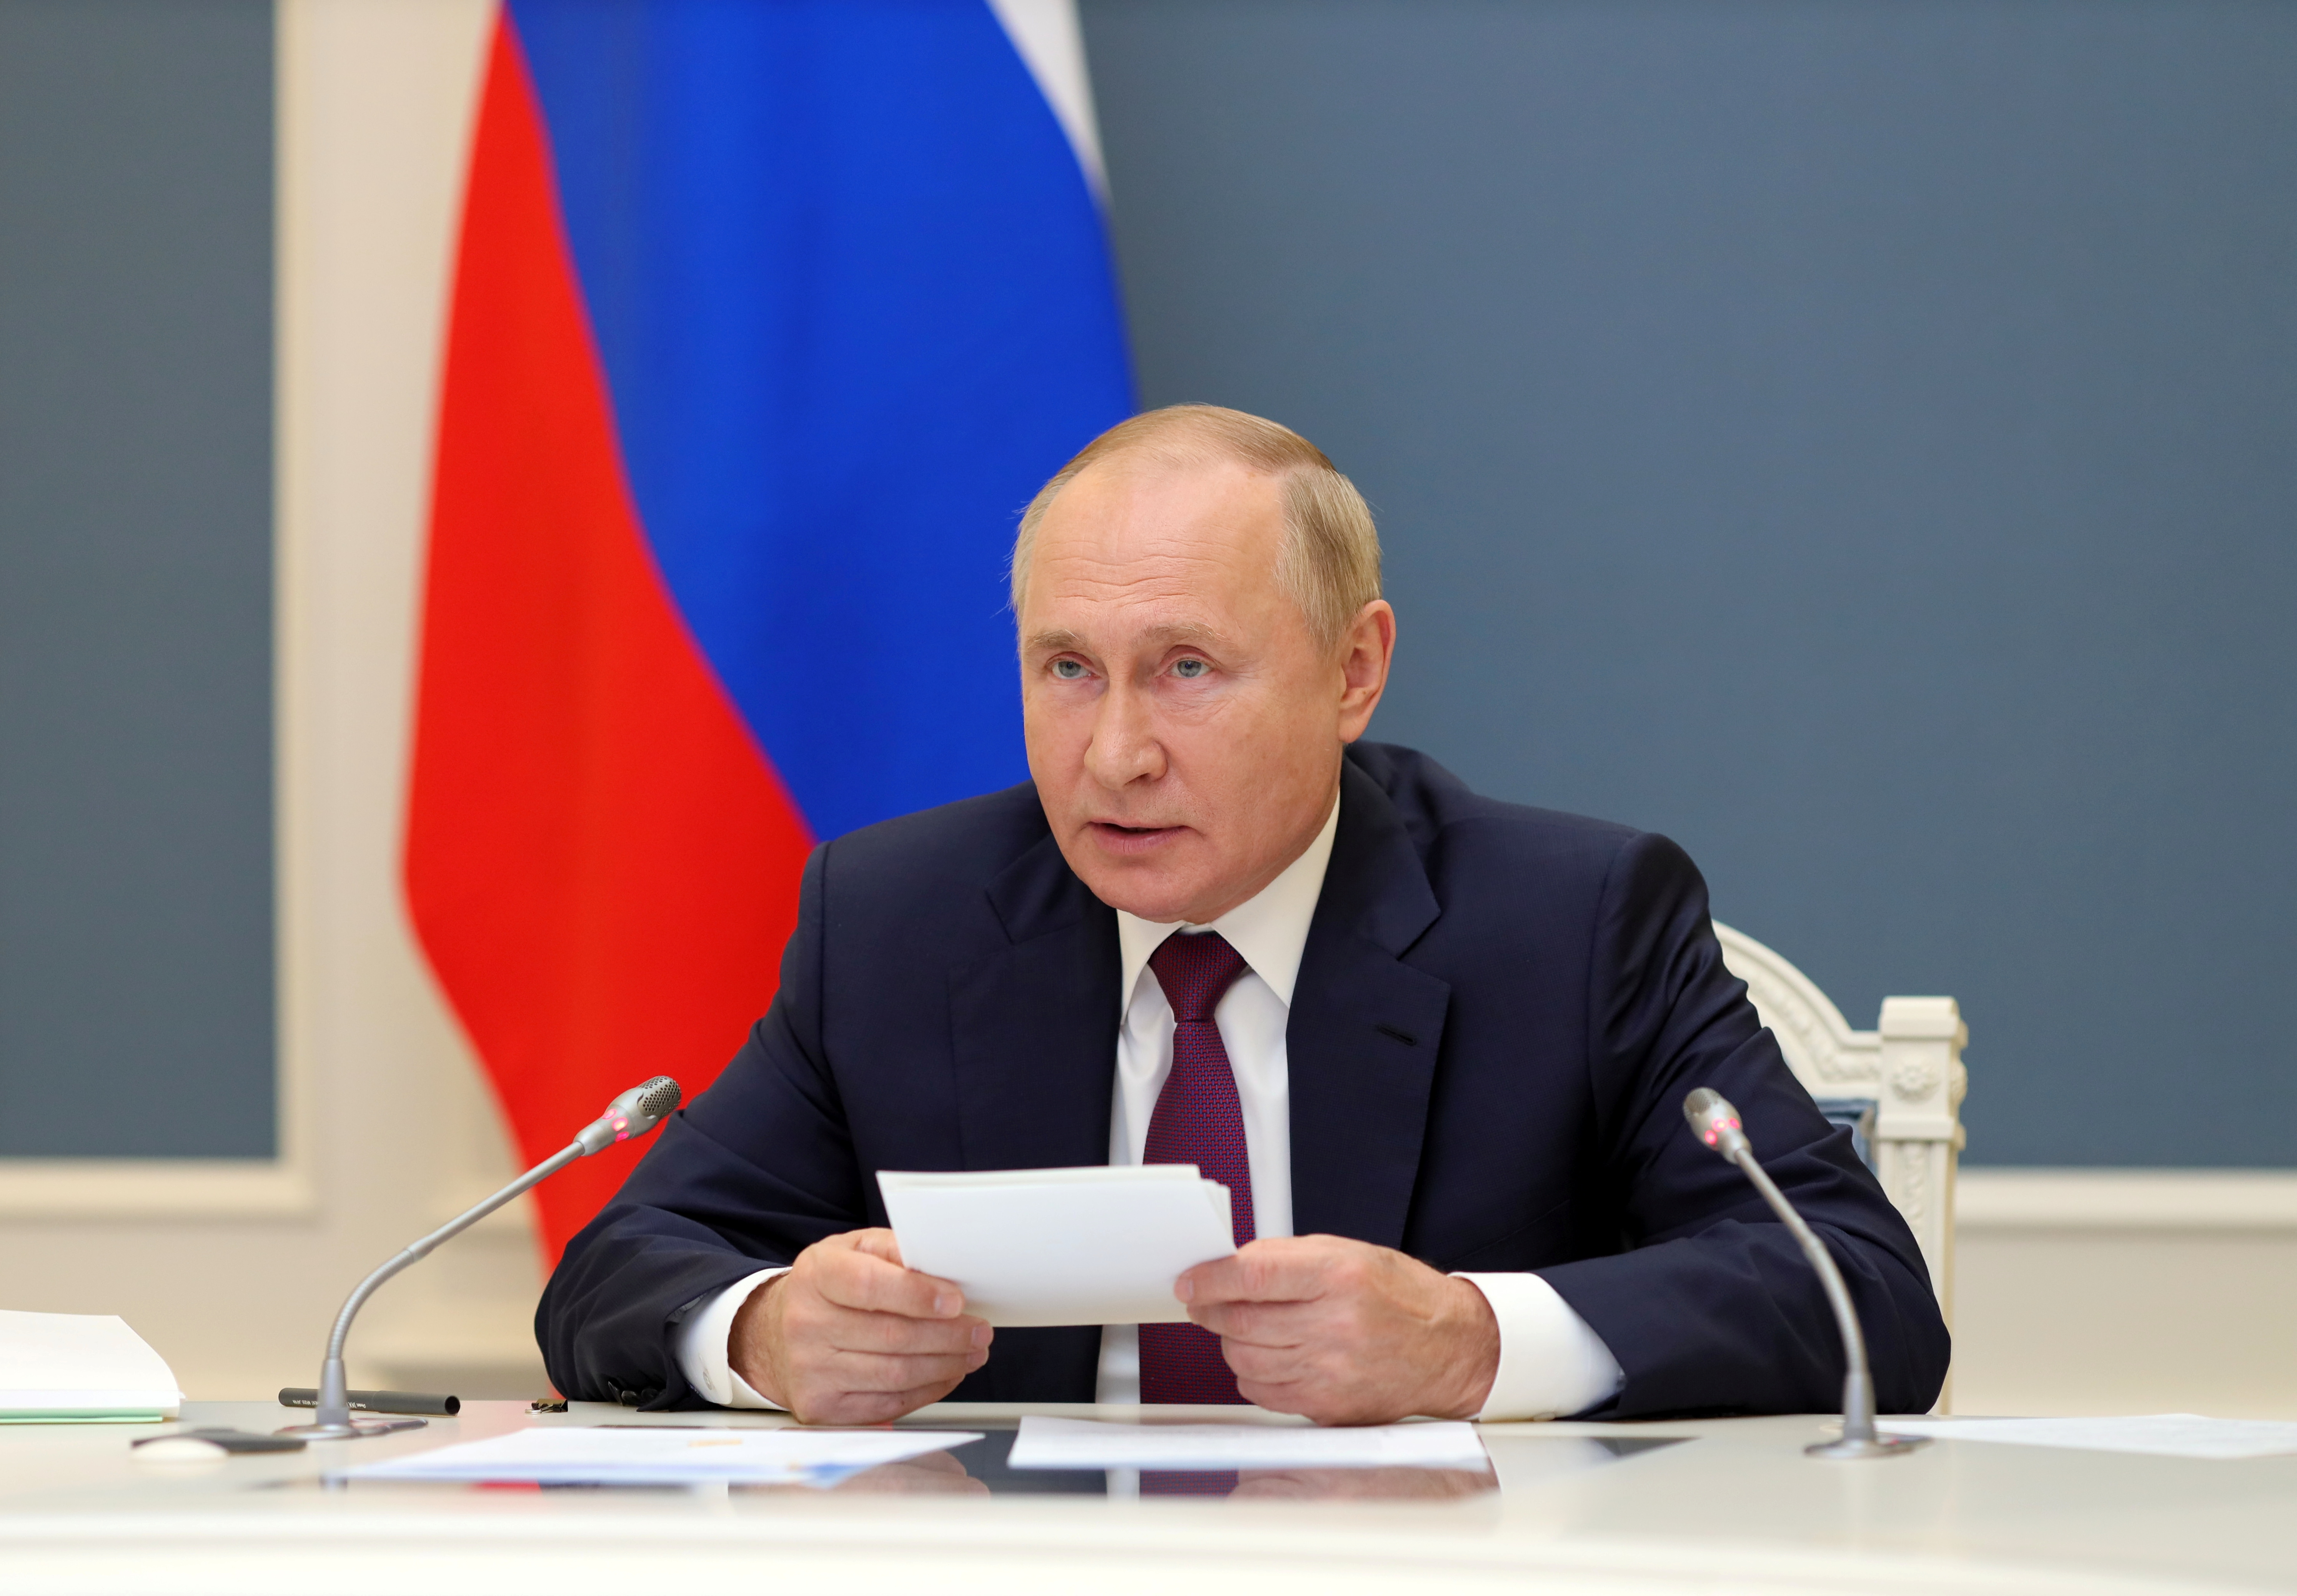 Russian President Vladimir Putin attends the G20 leaders summit via video link in Moscow